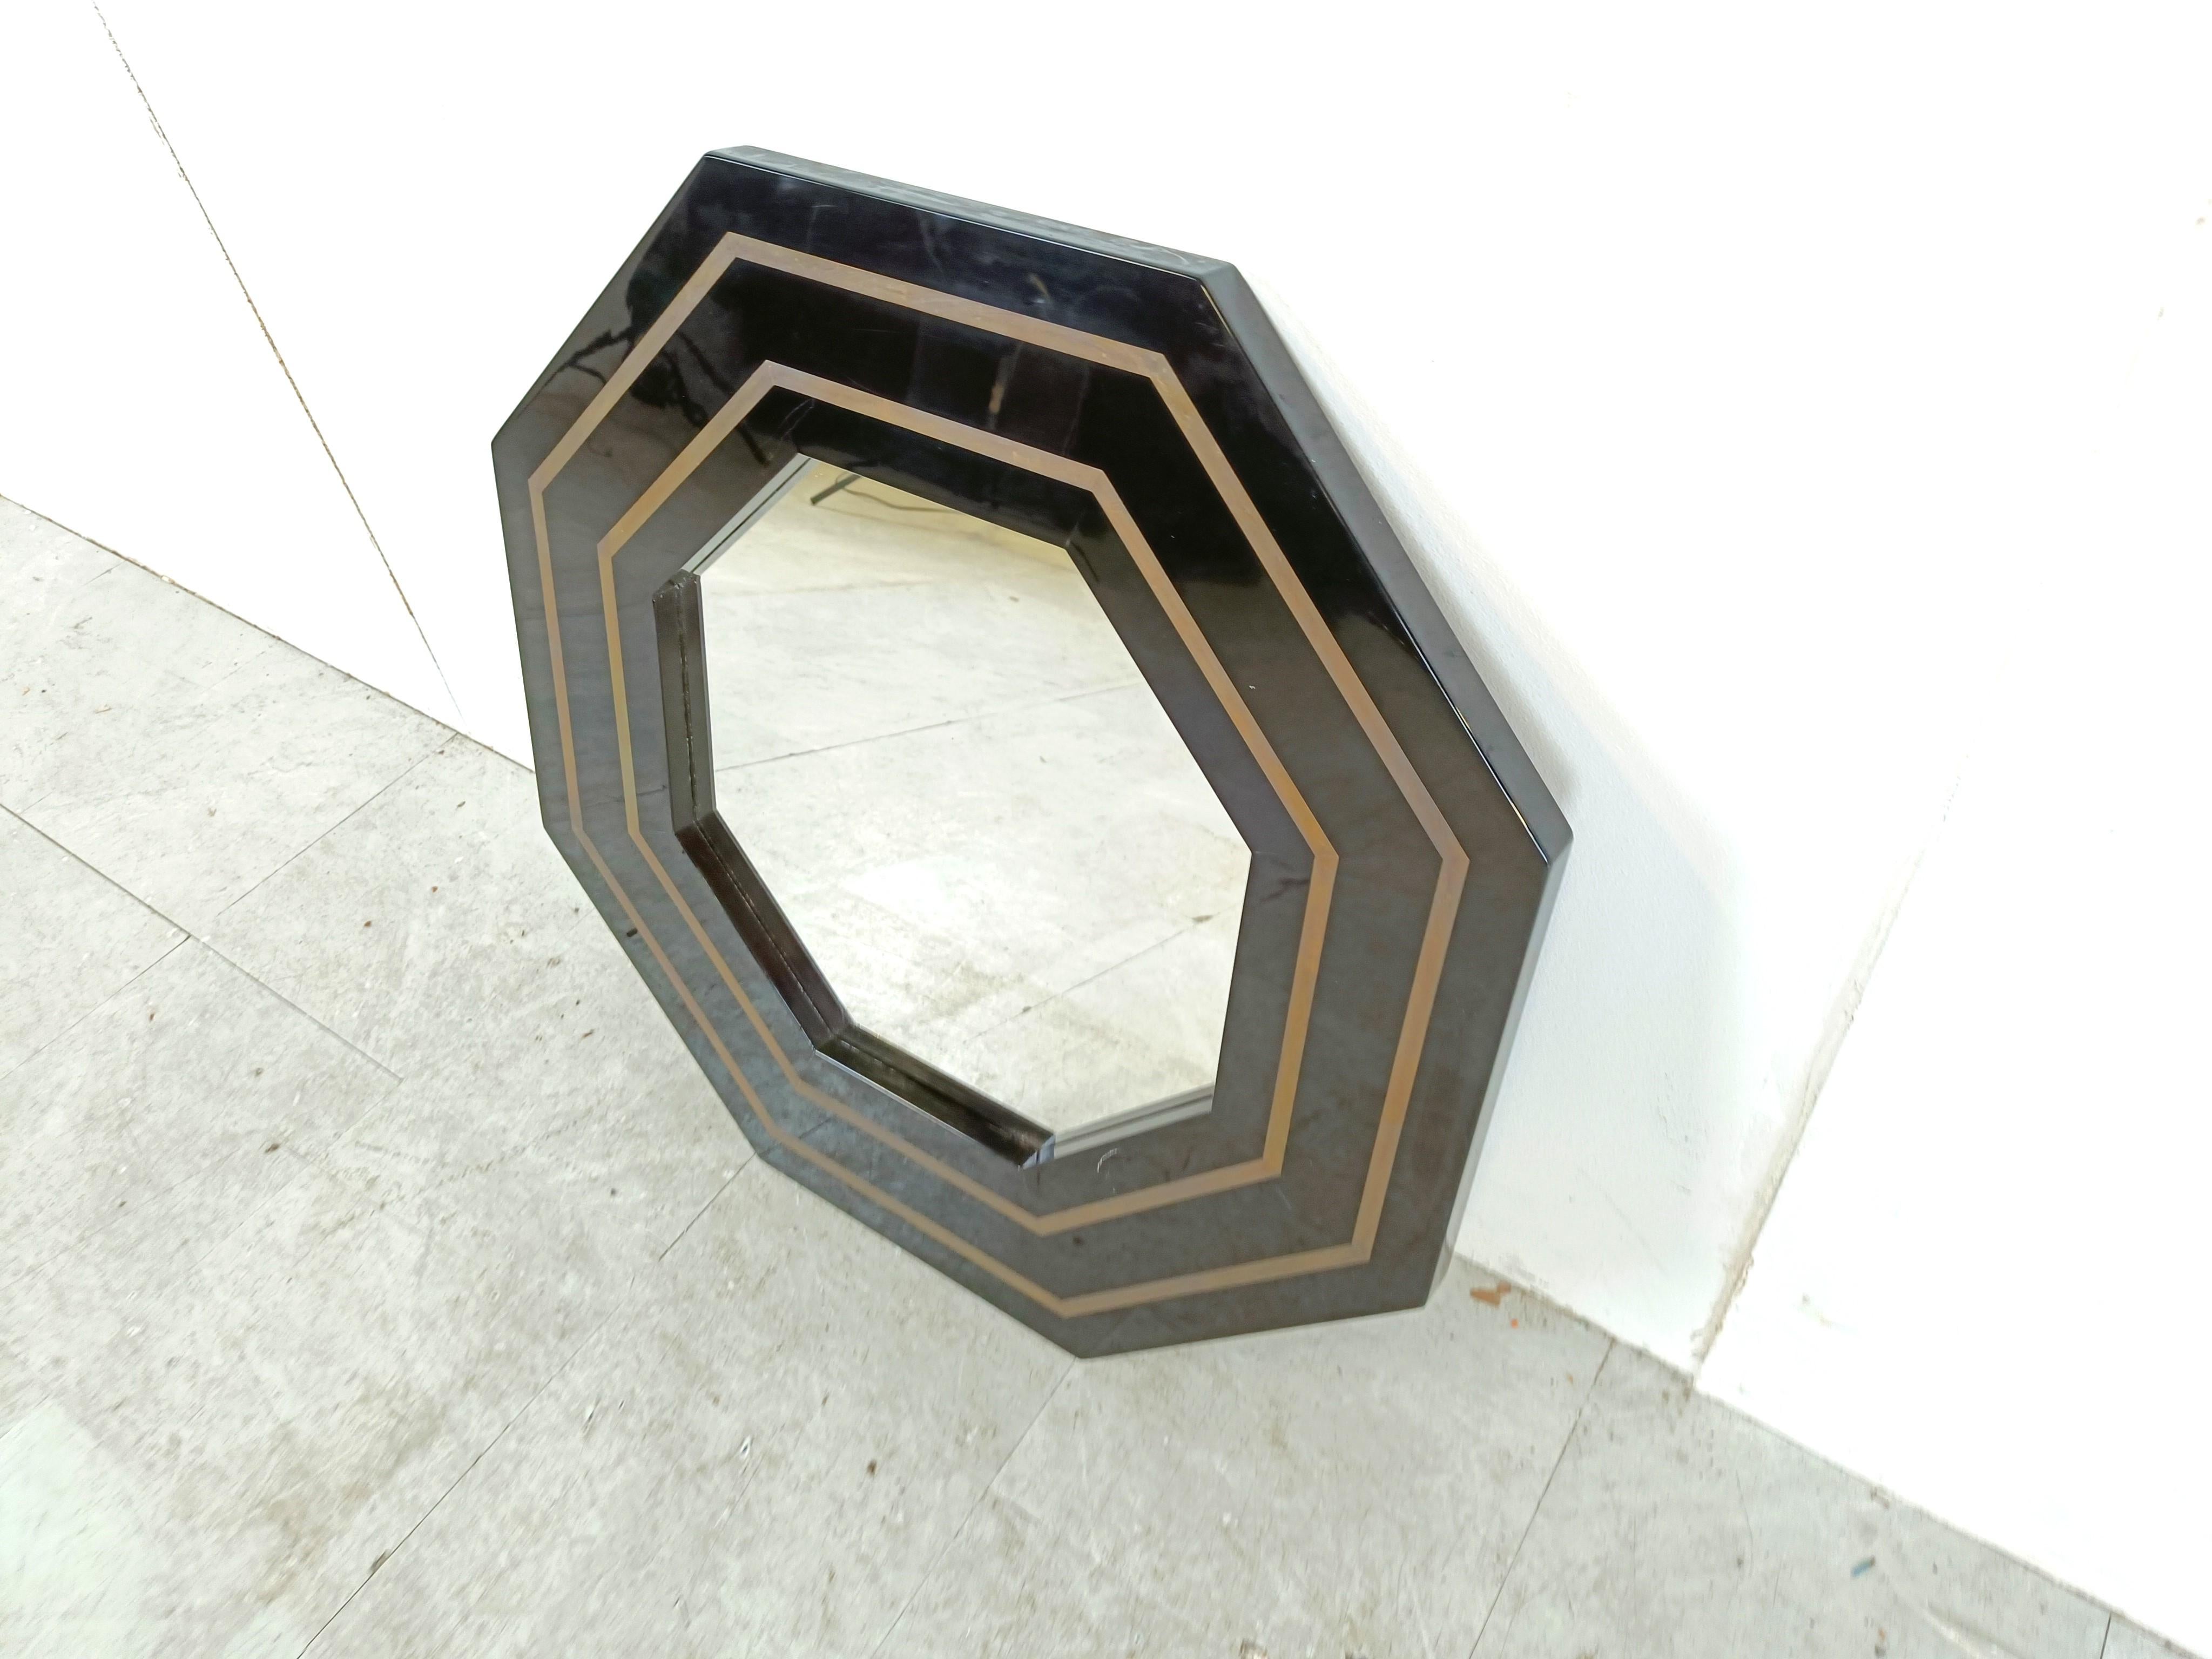 Vintage black lacquer and inlaid brass octogonal mirror by Jean Claude Mahey.

1970s - France

Very good condition

Dimensions:
Diameter: 72cm/28